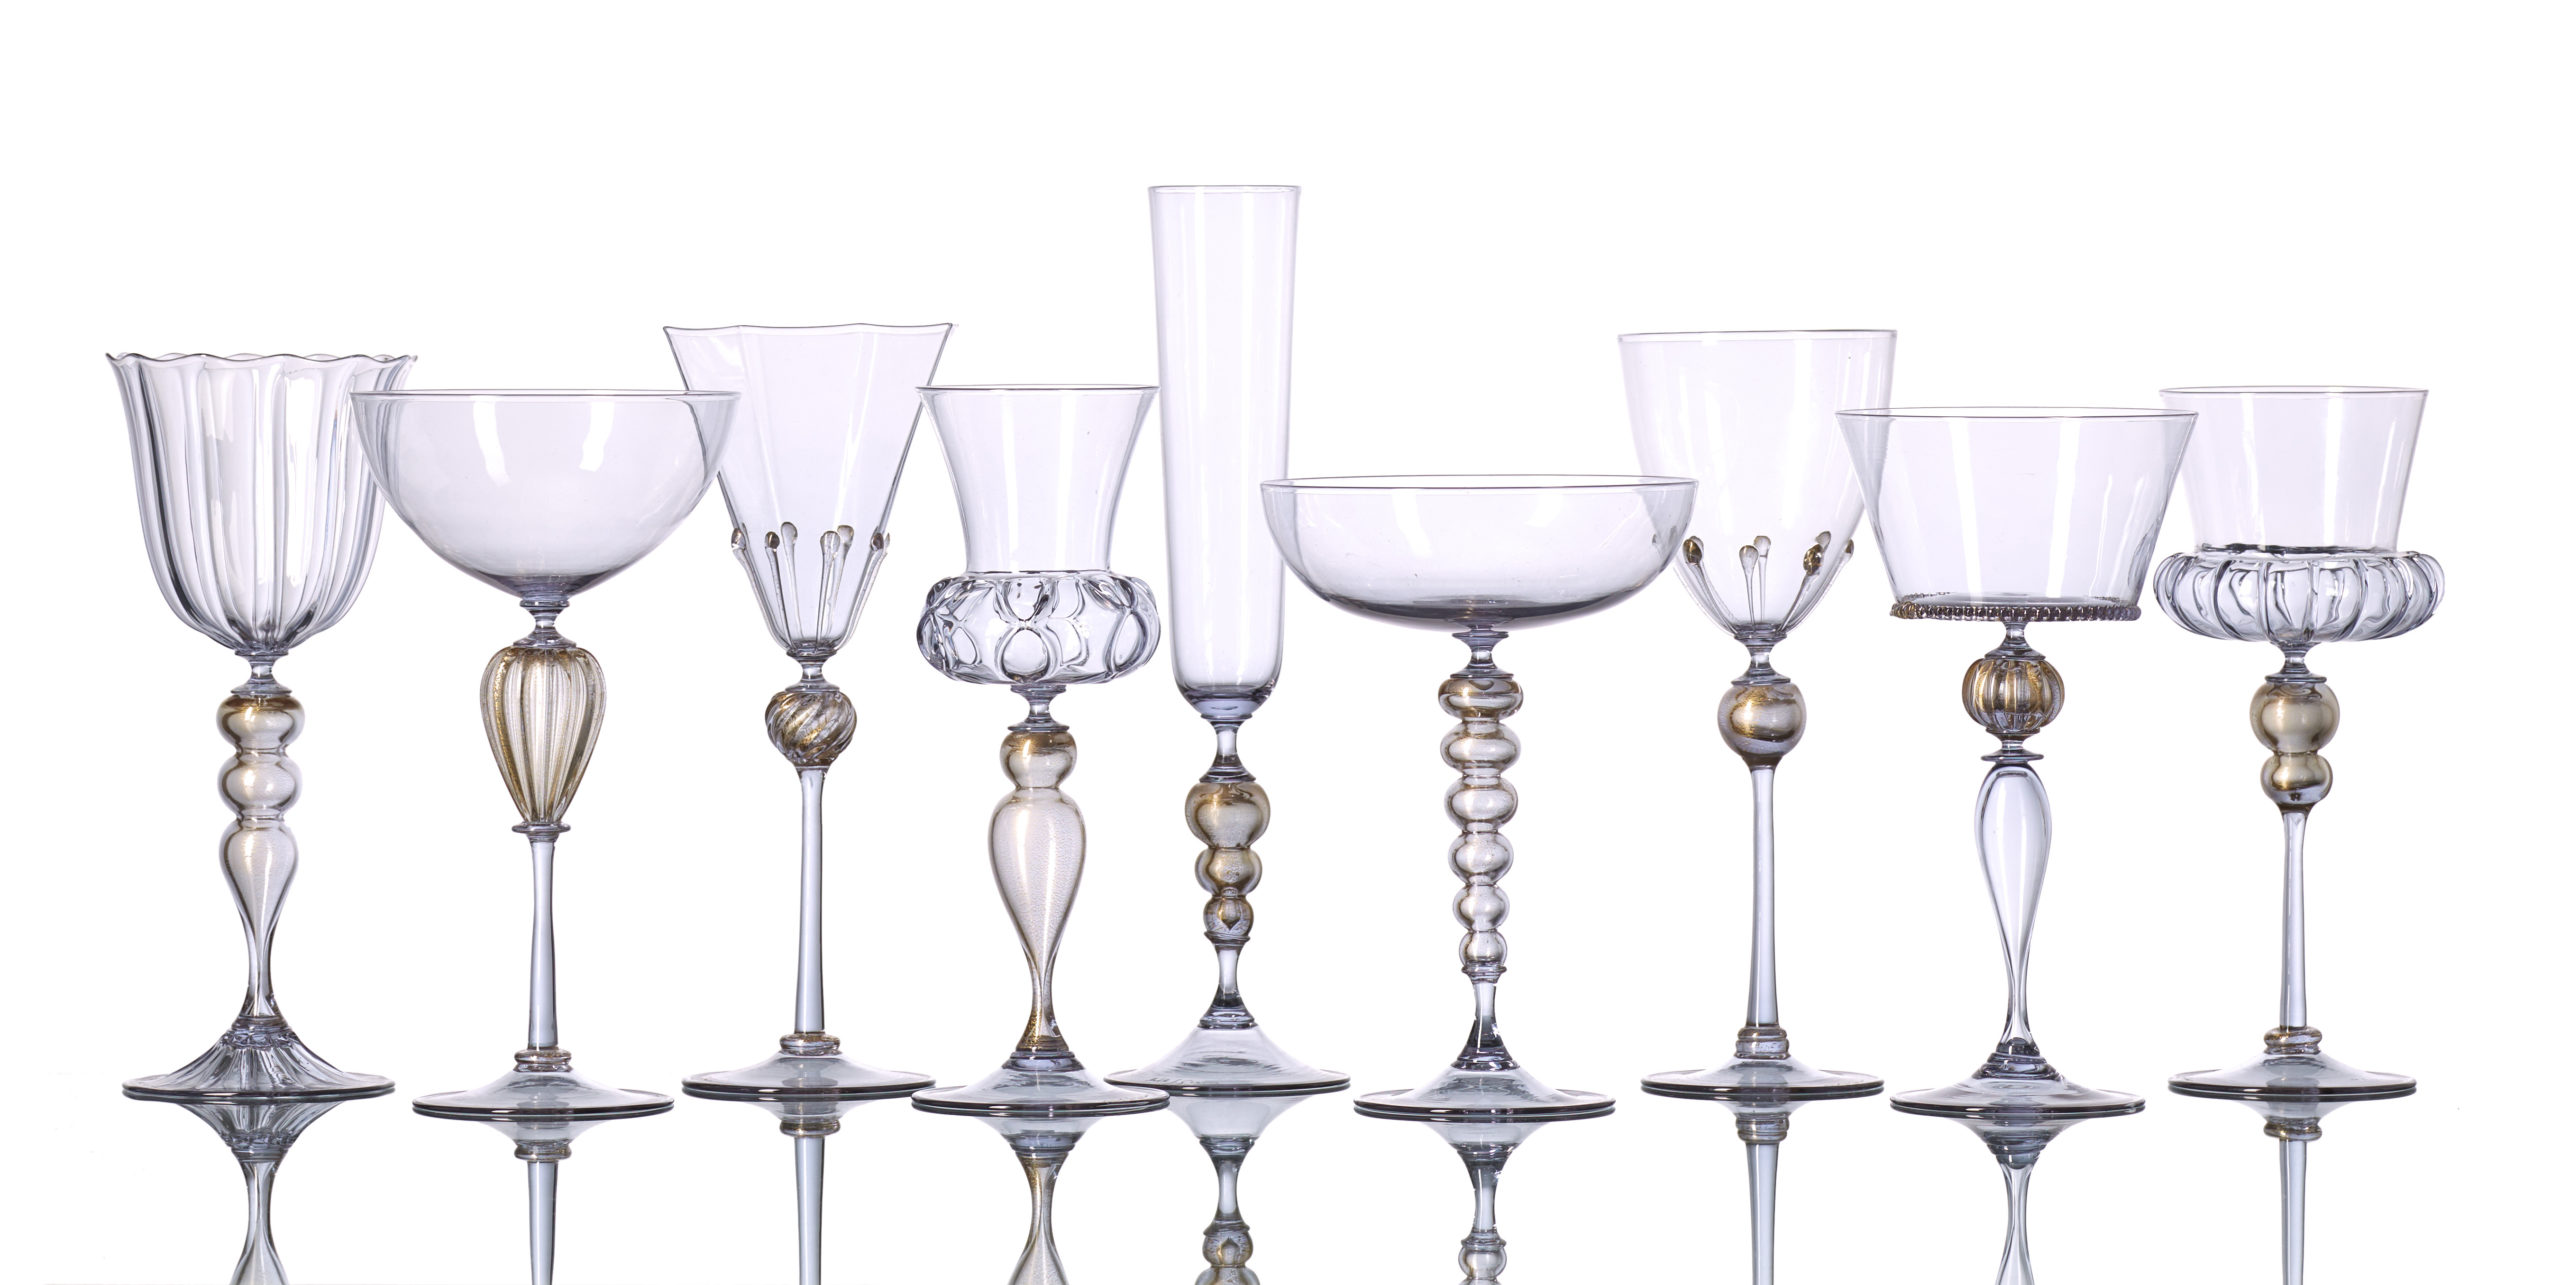 Michael Schunke: Time Well Spent | A Show of Goblets